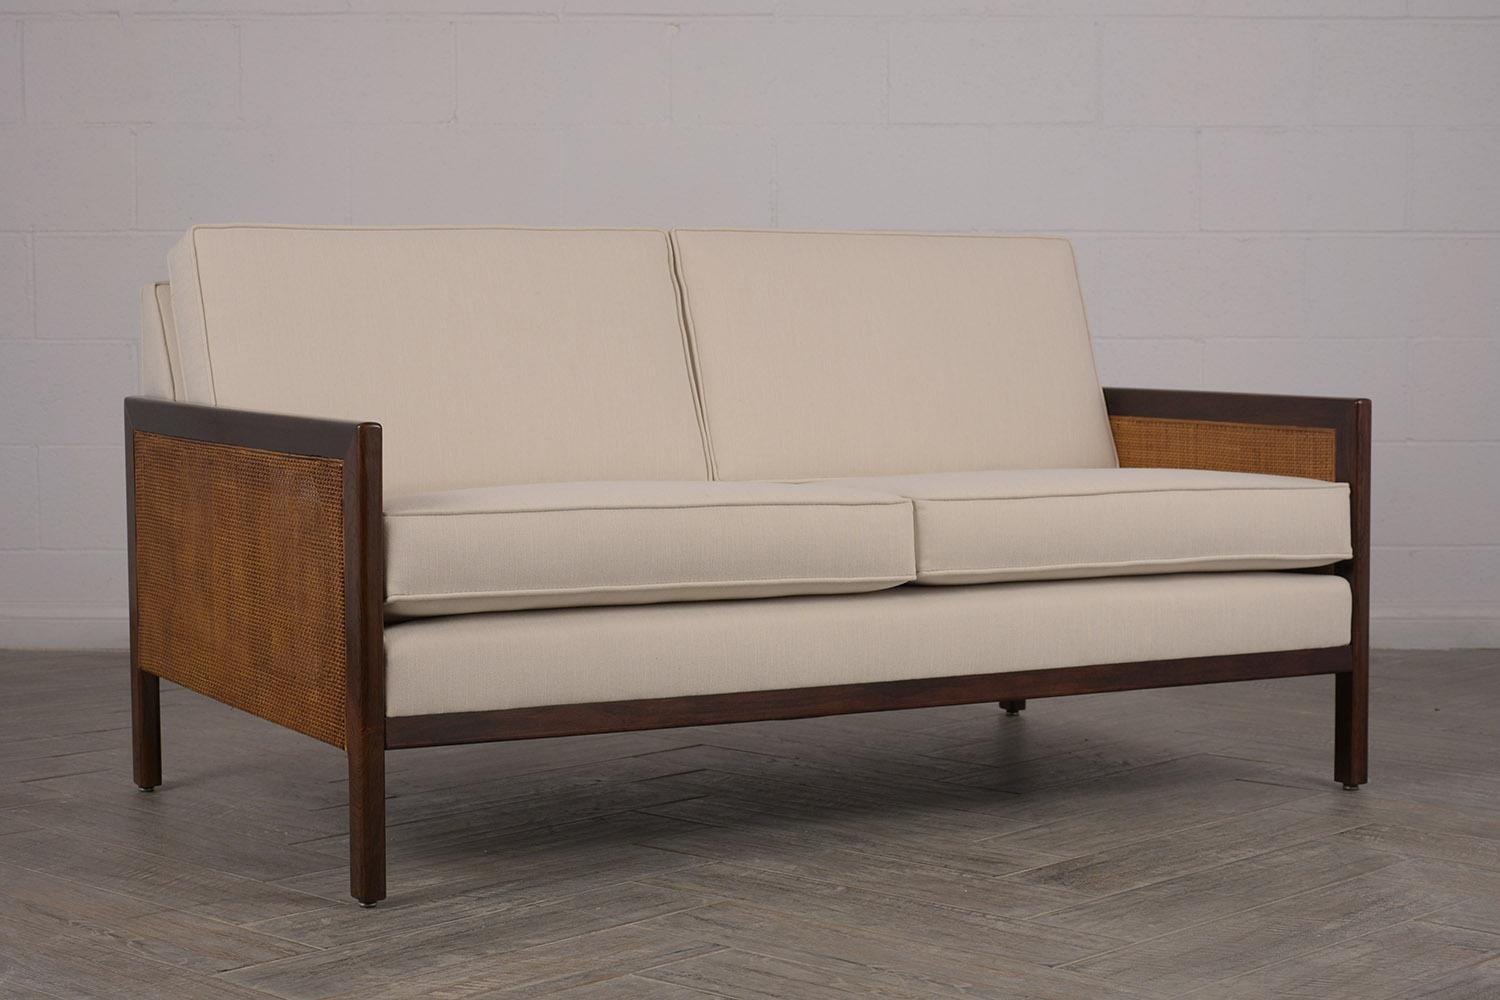 This is an elegant 2 person/cushion sofa Edward Wormley style. Has been fully restored to its original beauty and elegance. Frame is a rich solid rosewood, with double canning design, panels on both sides. Back, seat and cushions have been newly